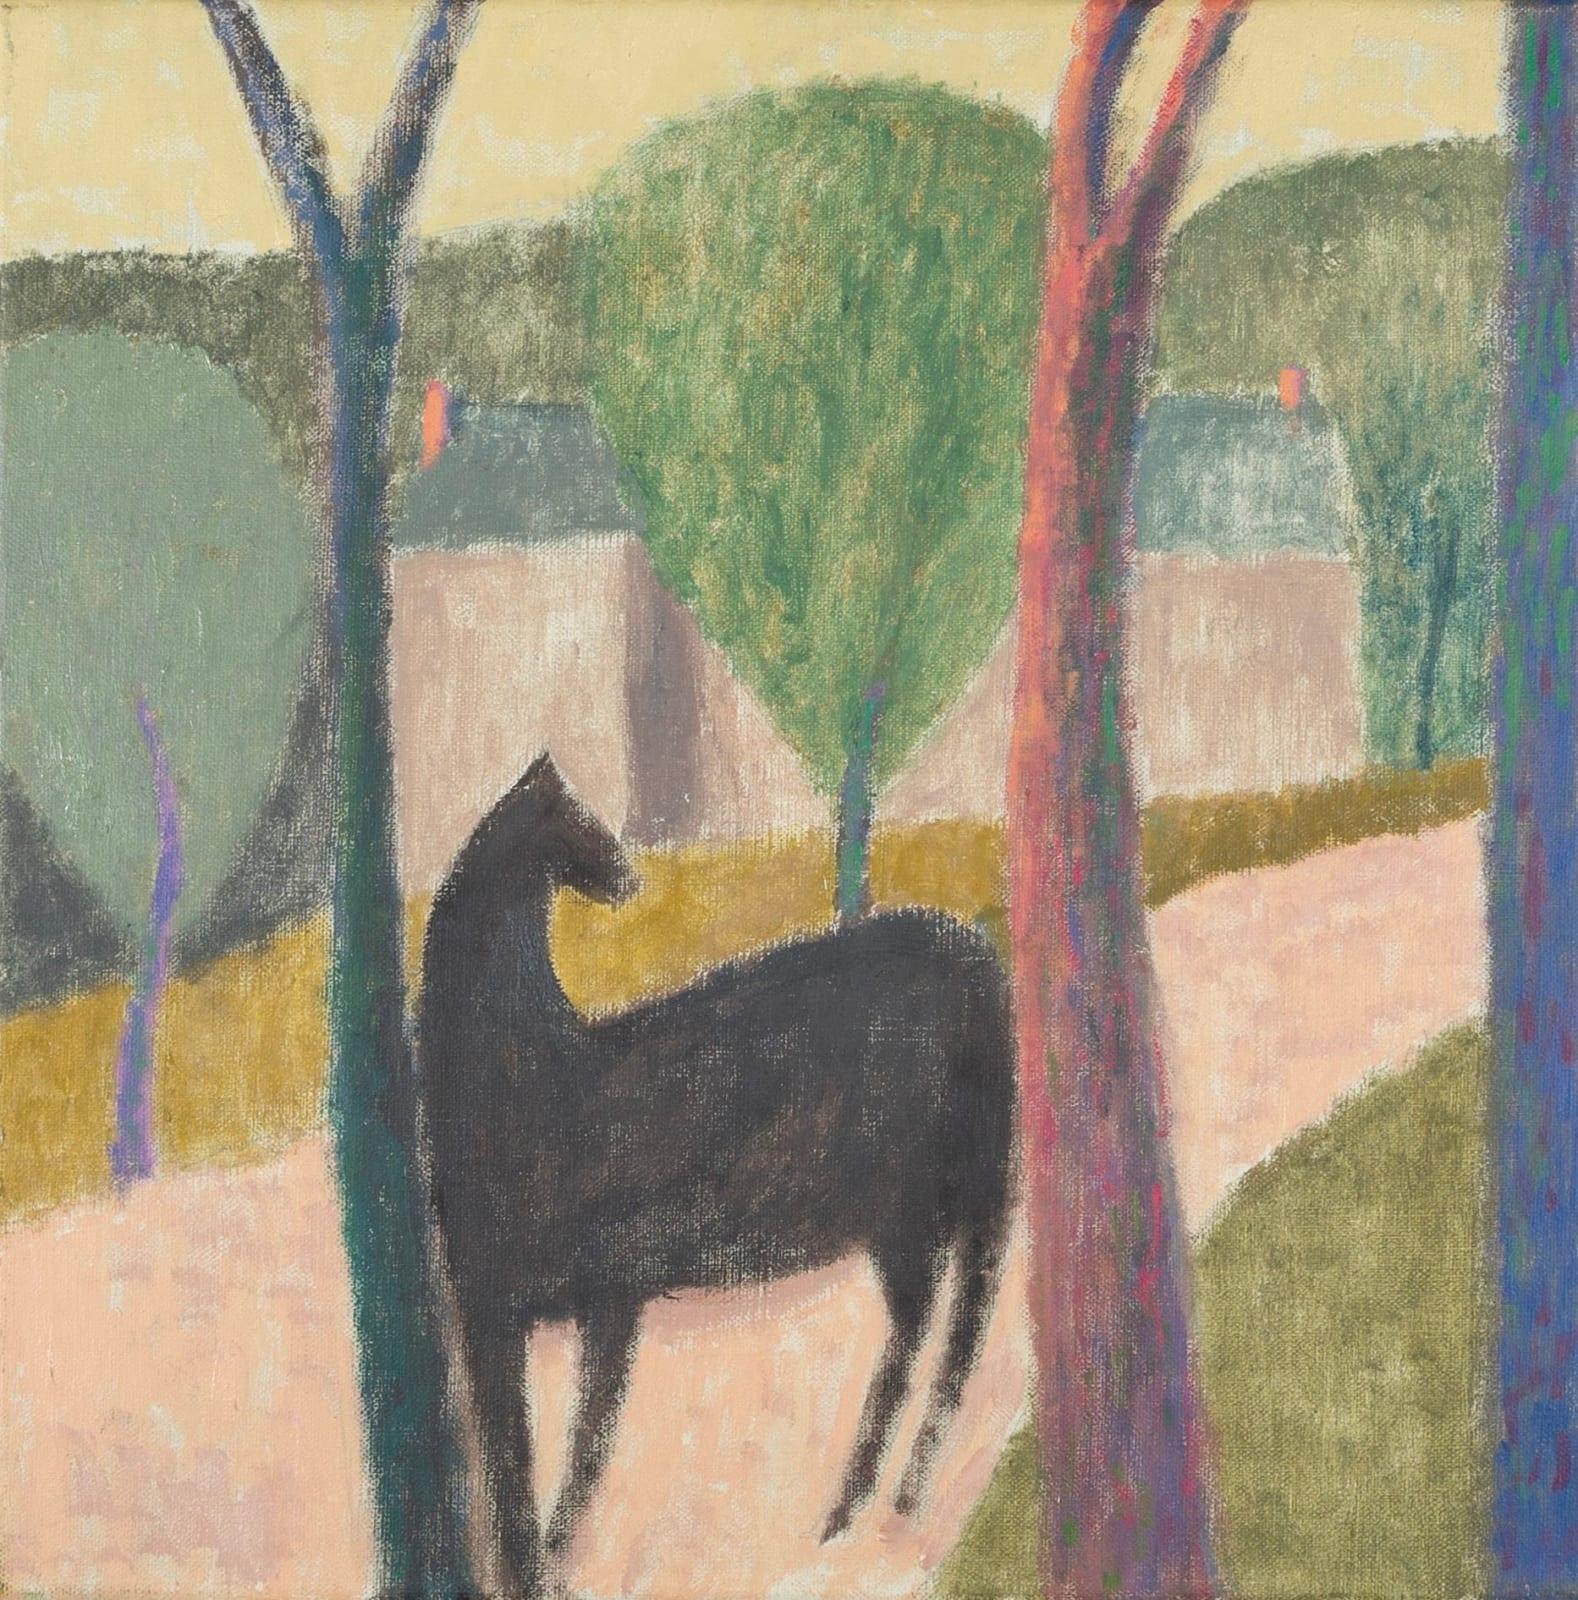 Lane with Horse Painting by Nicholas Turner B. 1972, 2022-23

Additional information:
Medium: Oil on canvas
Dimensions: 40 x 40 cm
15 3/4 x 15 3/4 in
Signed, dated and titled verso.

Nicholas Turner is a painter of quiet compositions that are